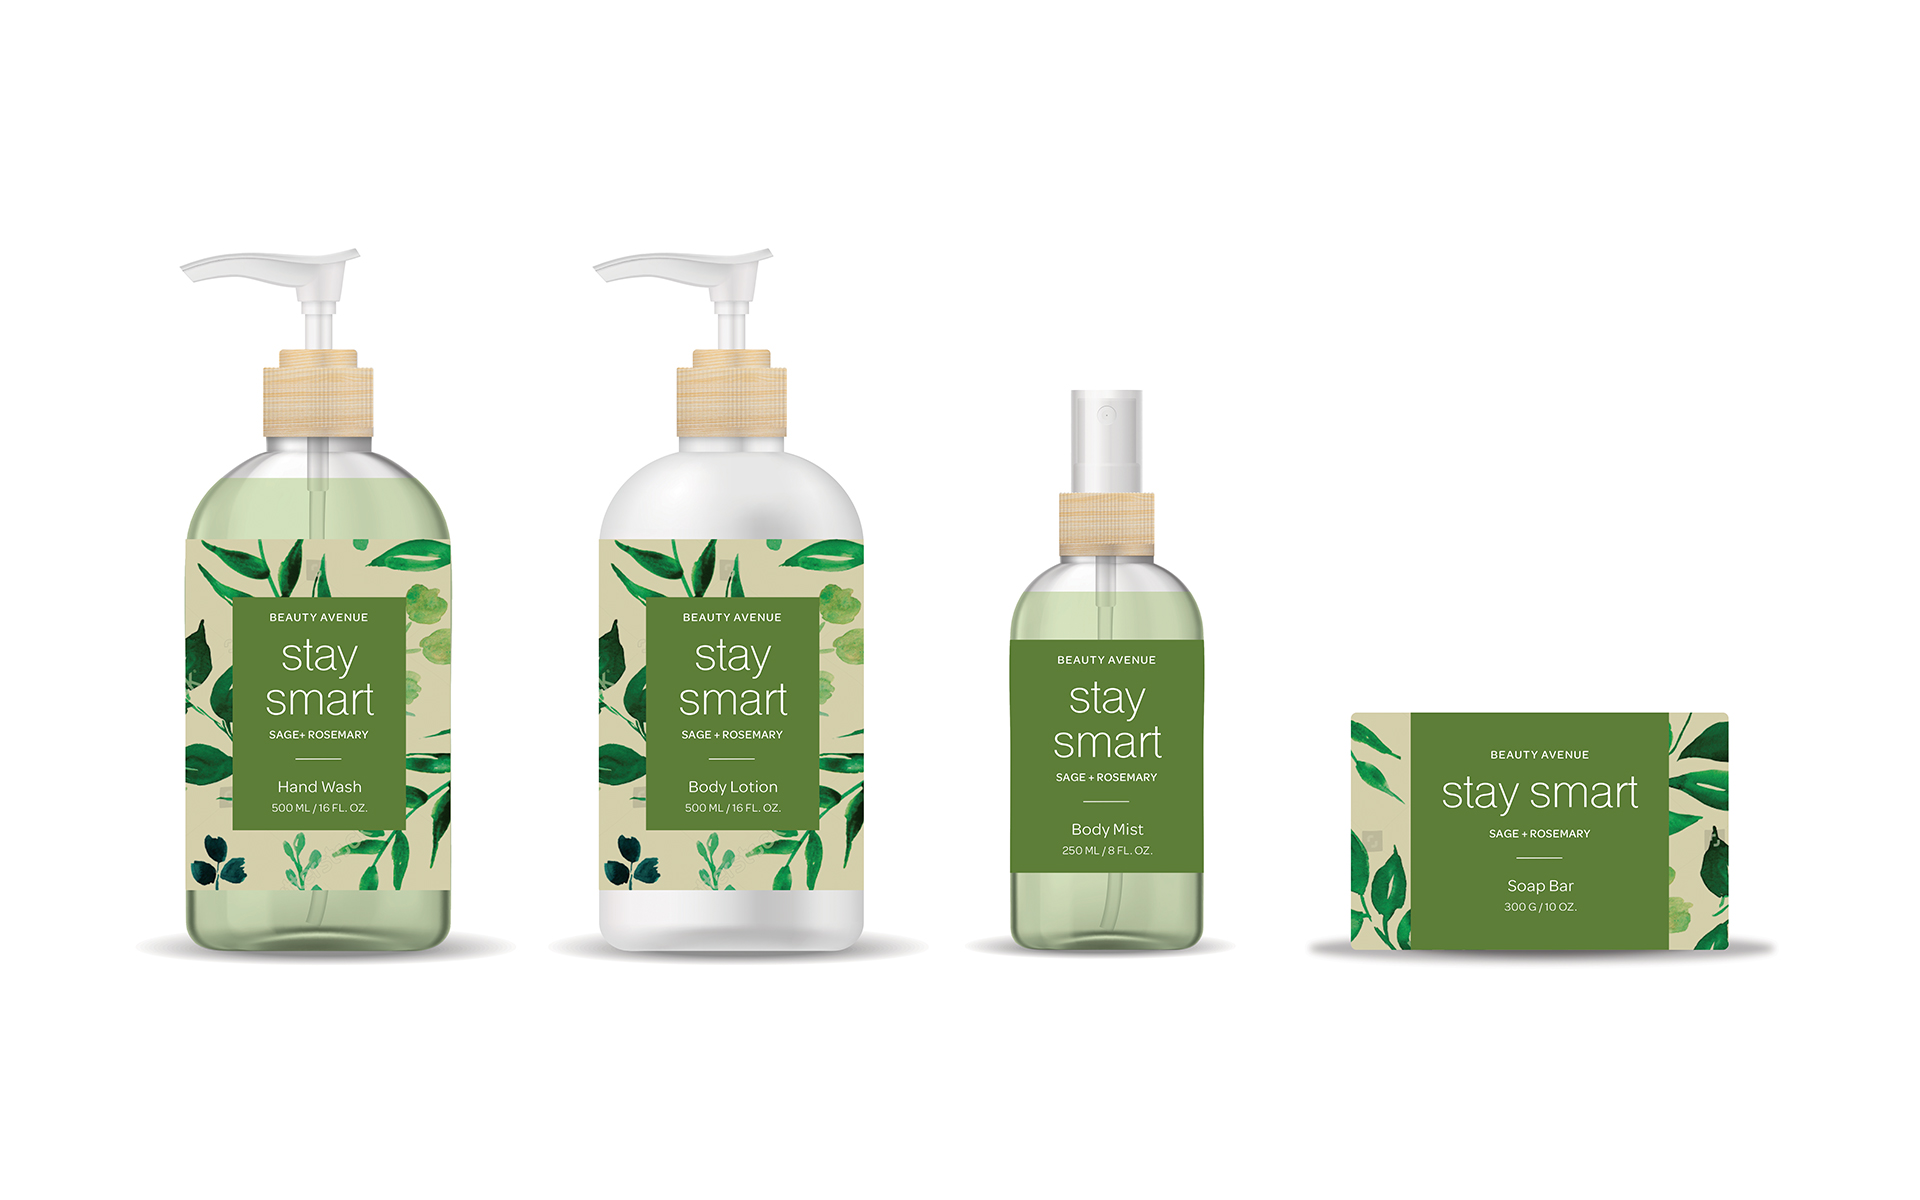 Paige Smith Portfolio Branding Packaging Project